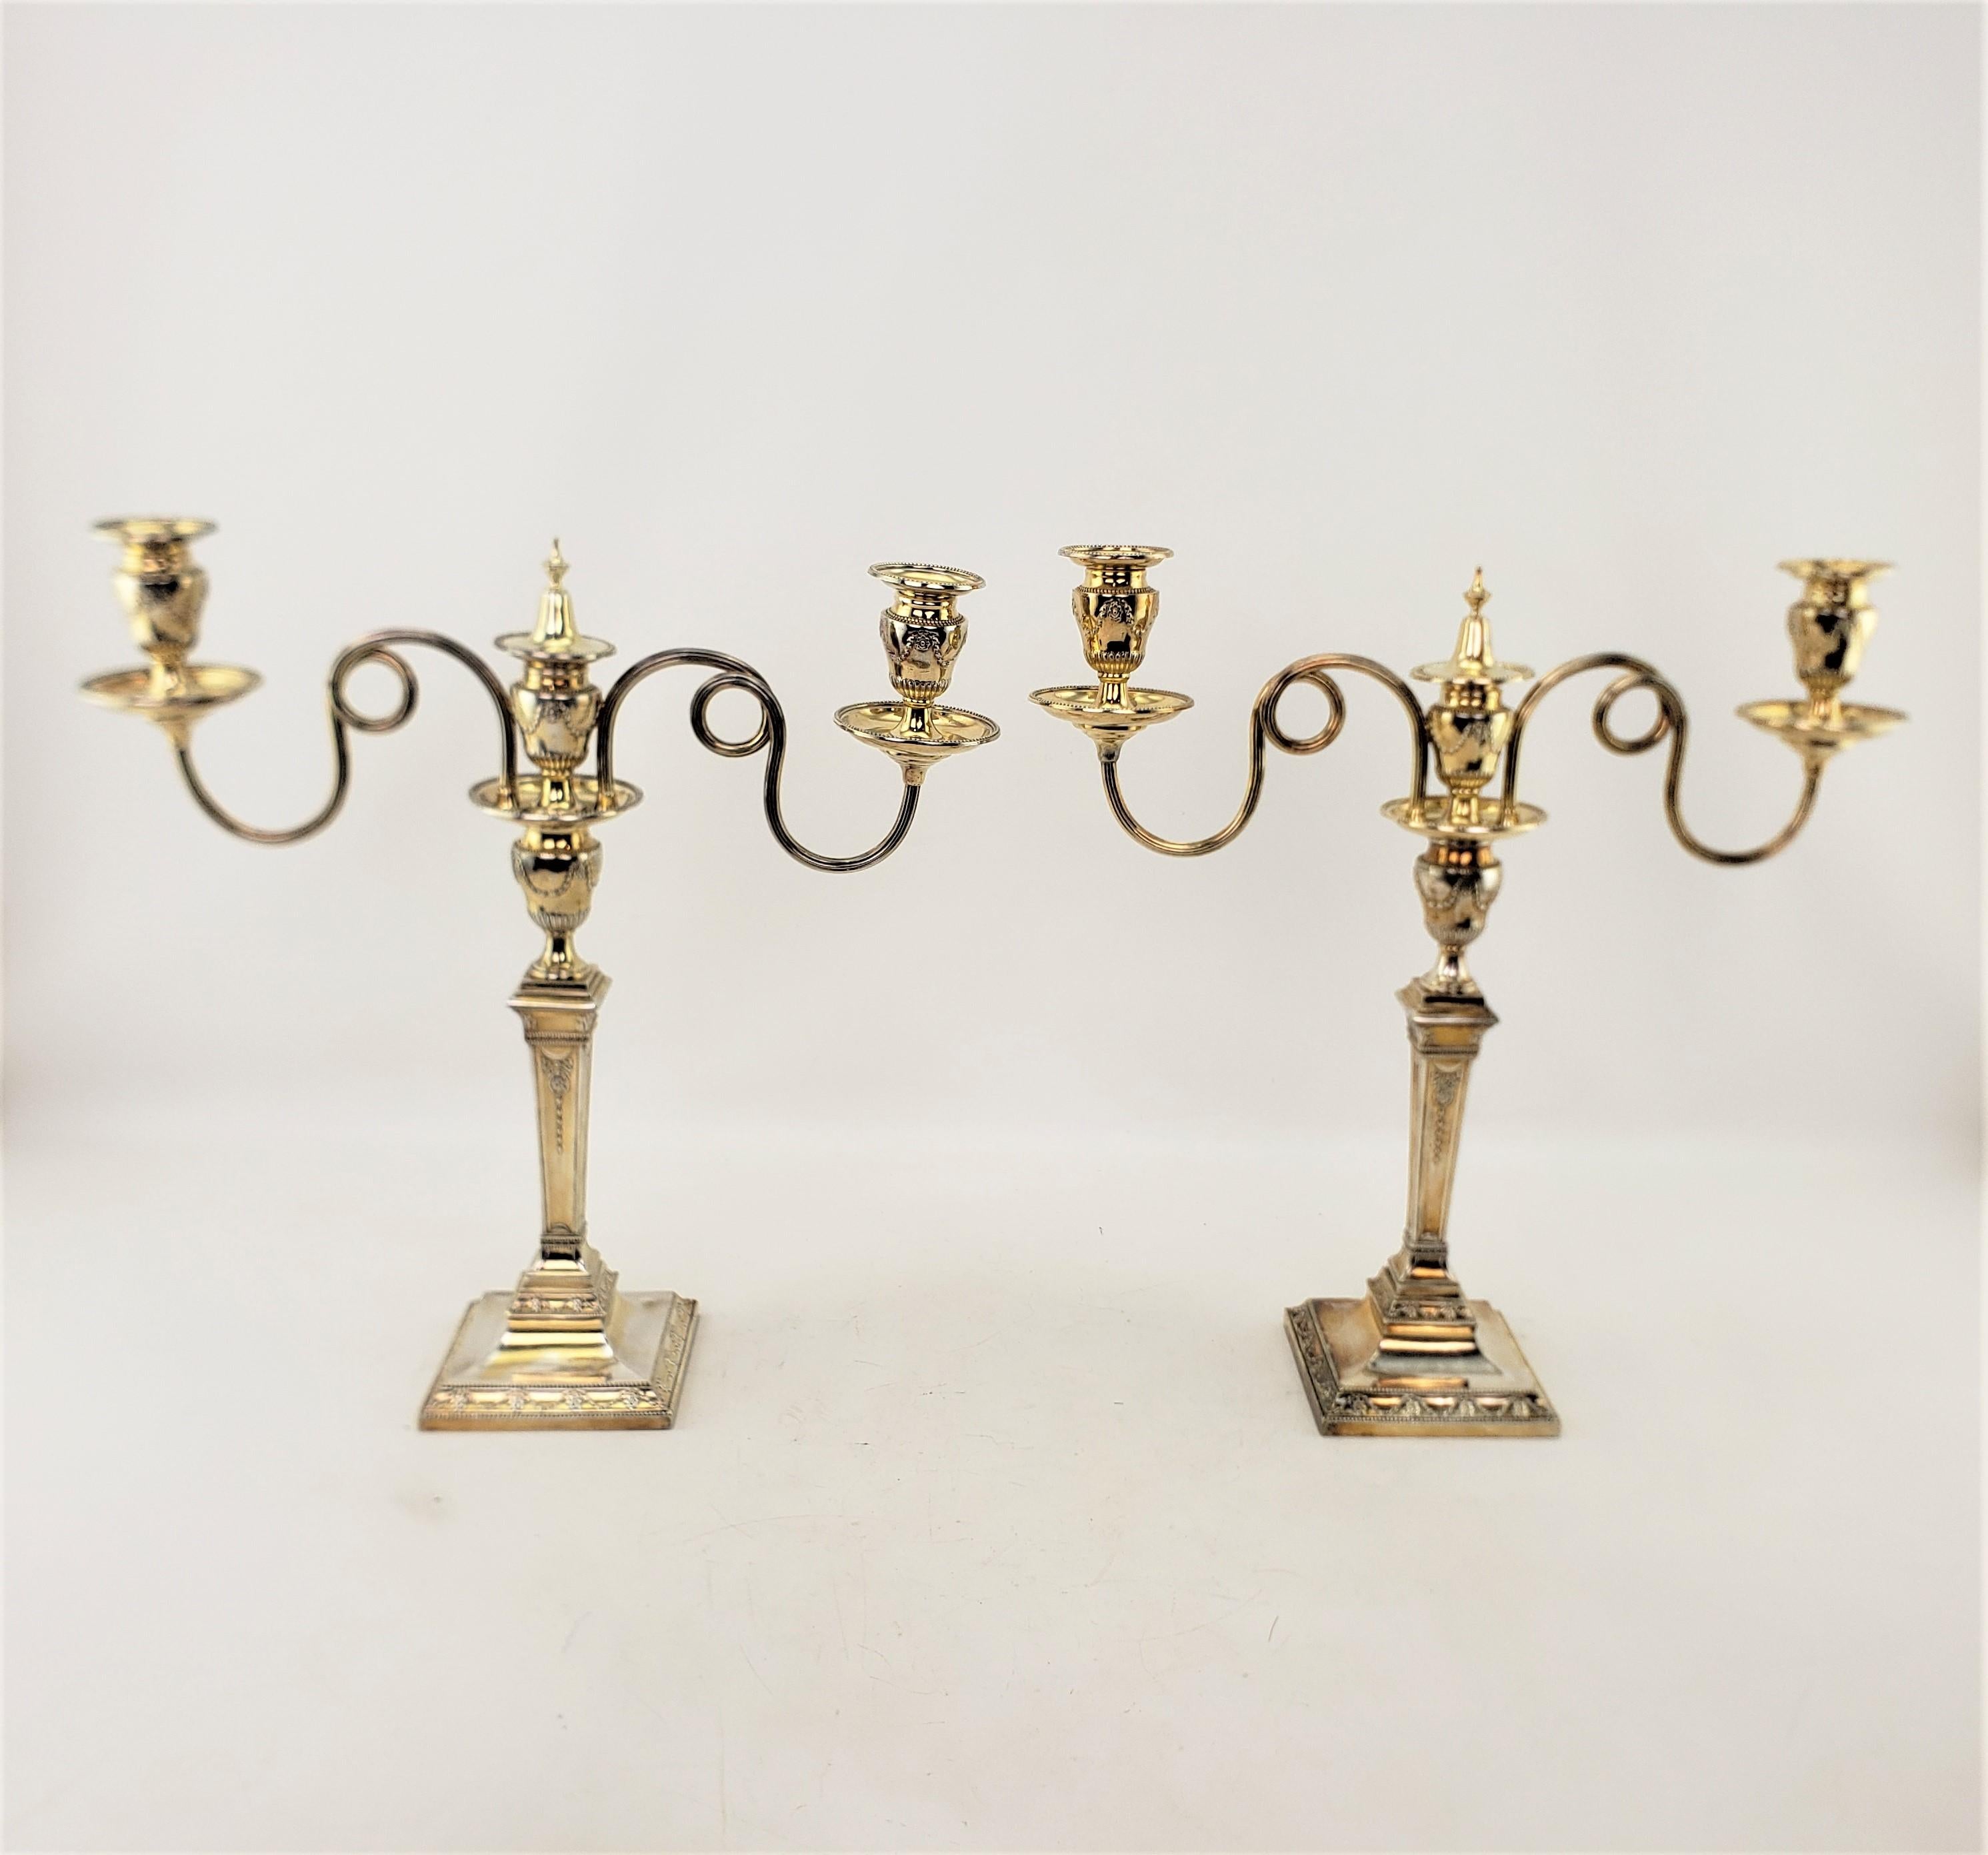 20th Century Set of Antique Mappin & Webb Silver Plated & Gilt Washed Convertible Candelabras For Sale